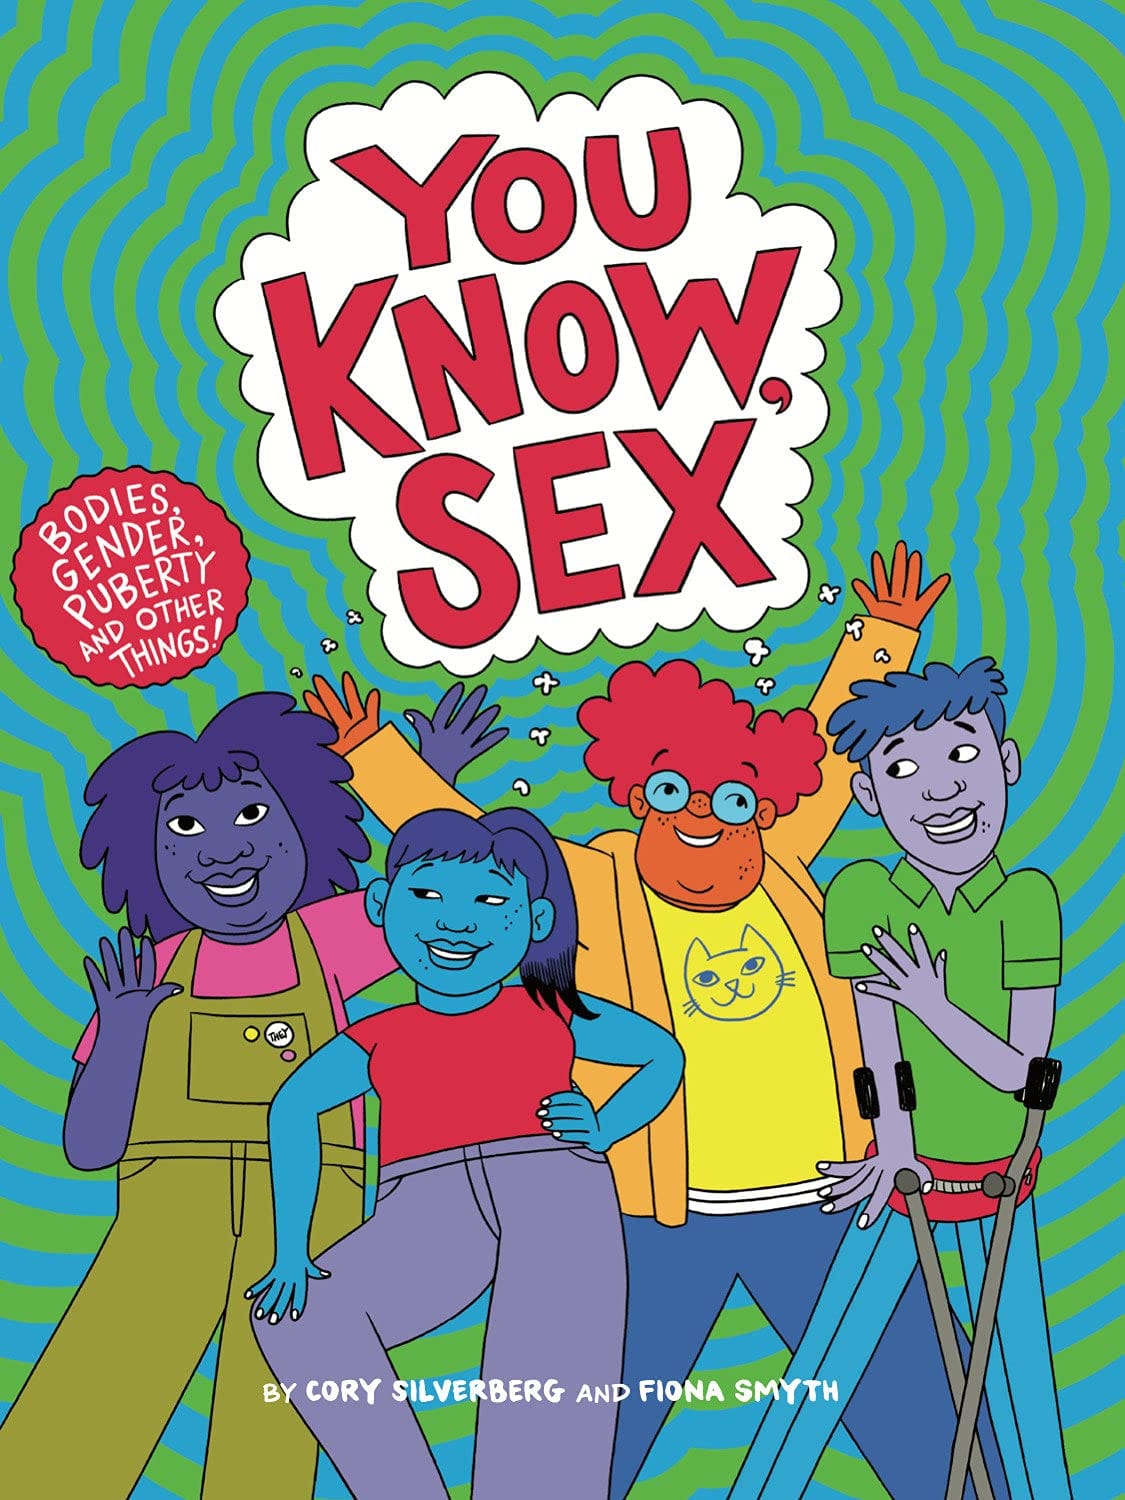 You Know Sex: Bodies Gender Puberty and Other Things by Cory Silverberg - Third Eye